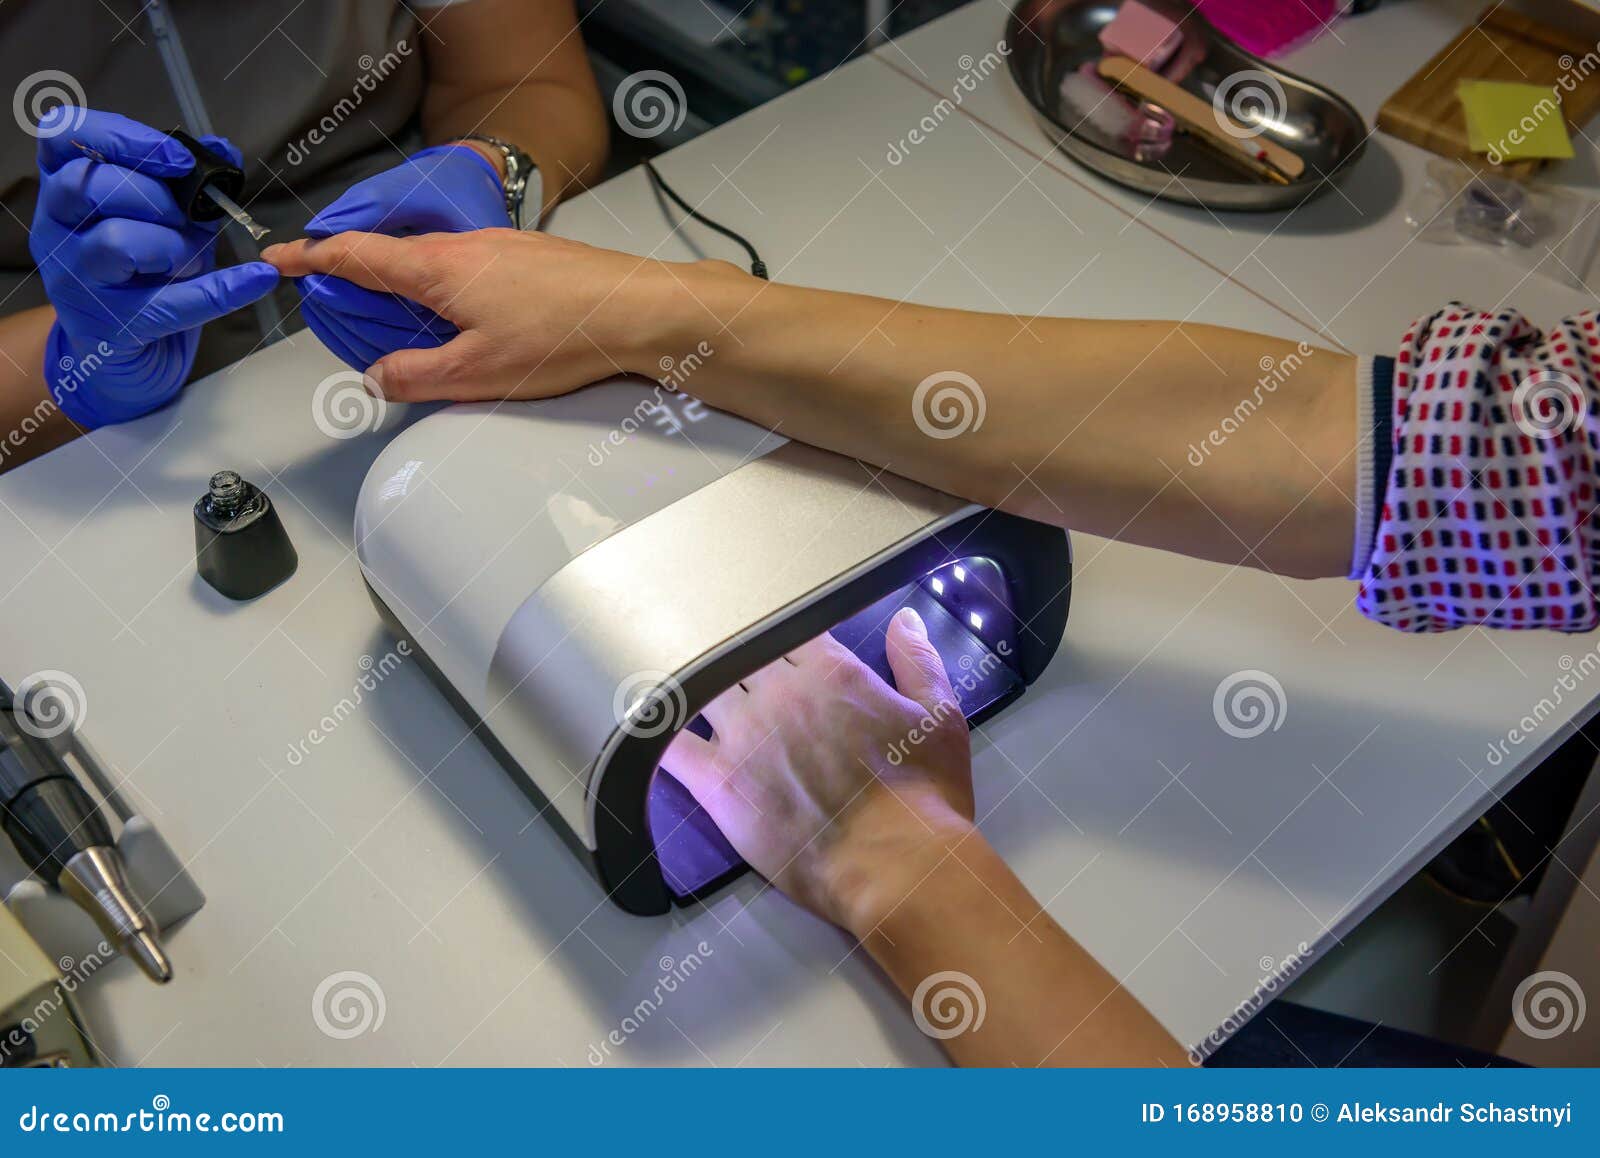 Ultraviolet Lamp In Manicure Salon. Young Woman Drying ...